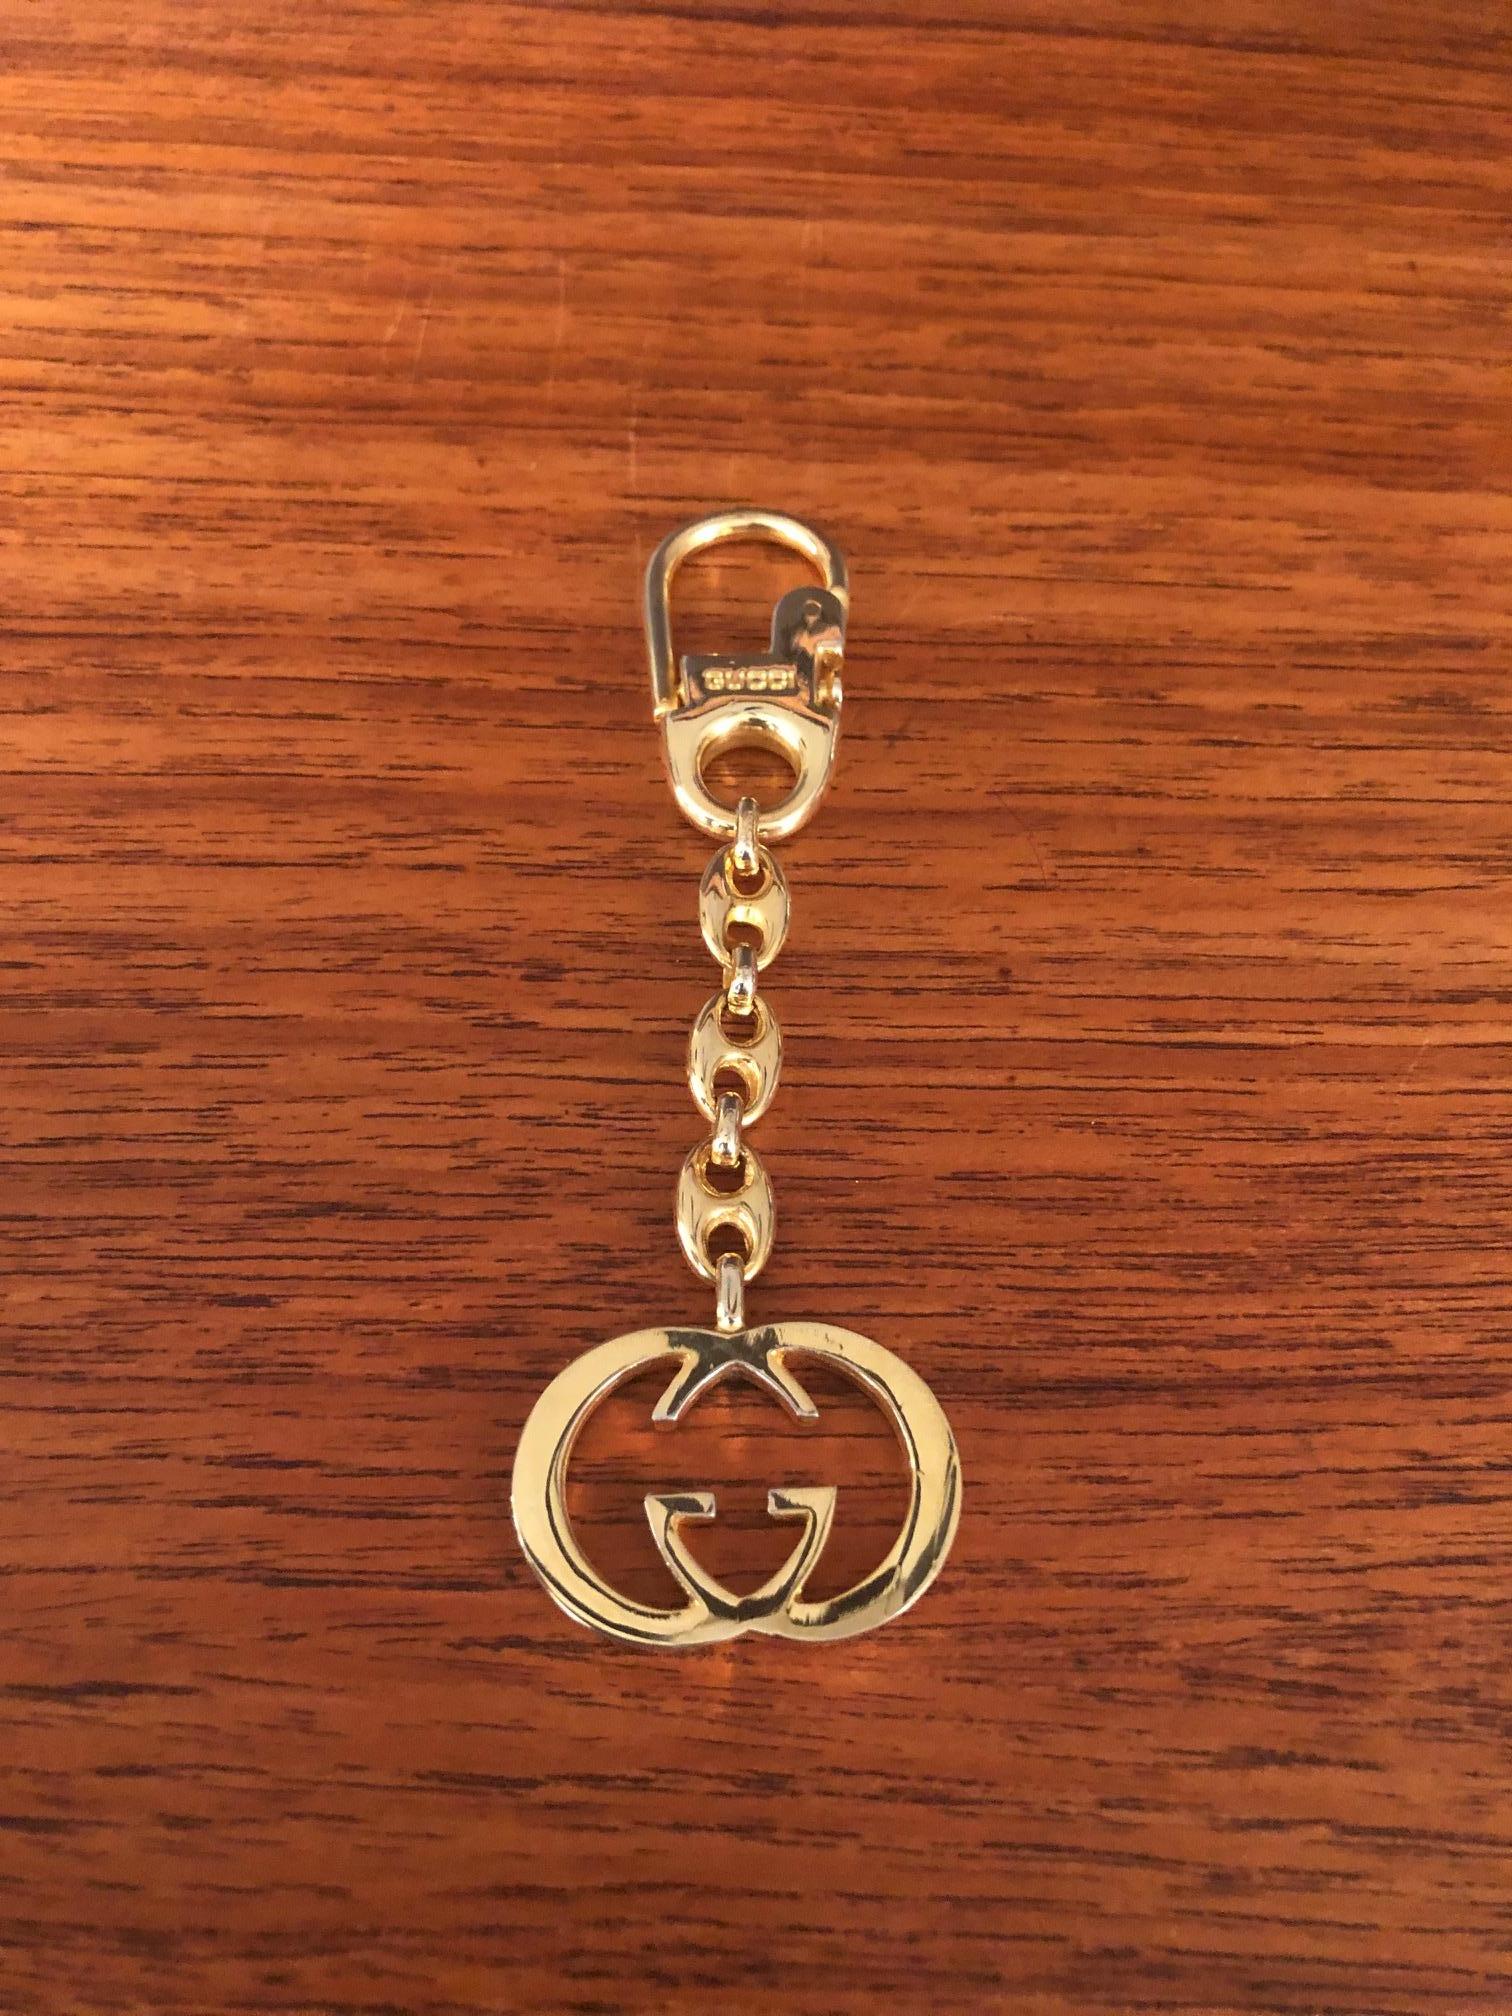 Modern Vintage Gold-Plated Logo Keychain by Gucci